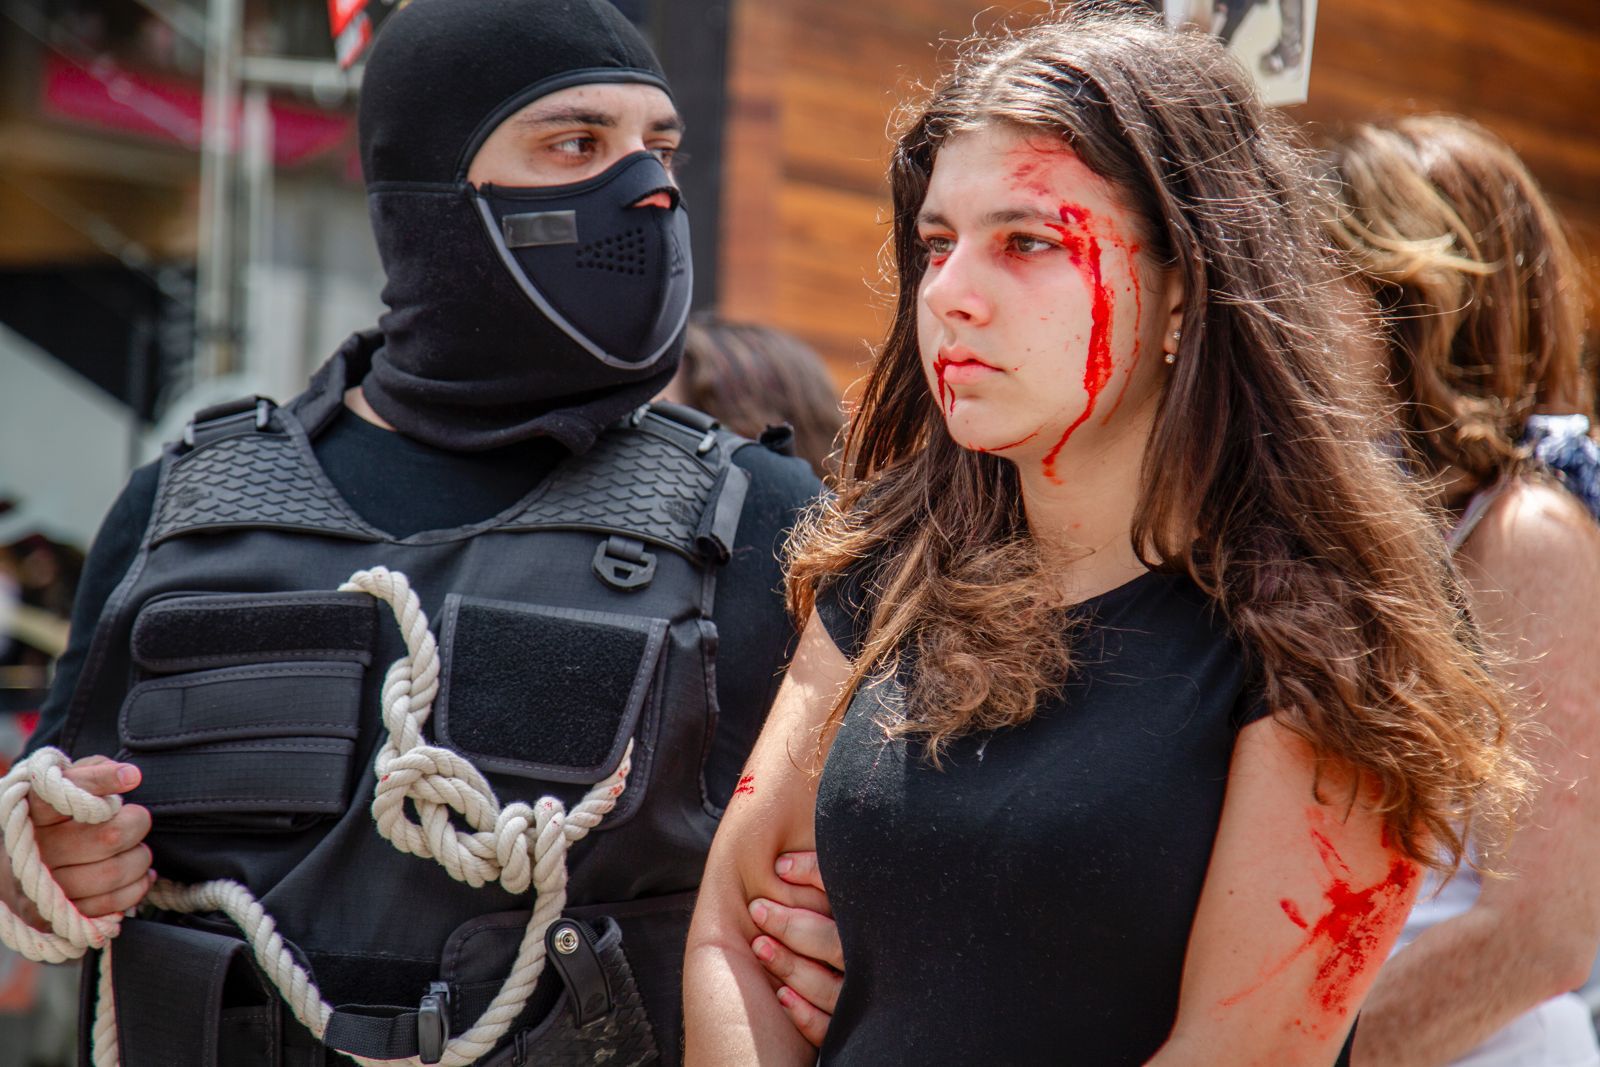 Download Firl Rape Porn Video - Bound and 'bloodied' girl shocks Brazilians into comprehending Hamas  horrors | The Times of Israel